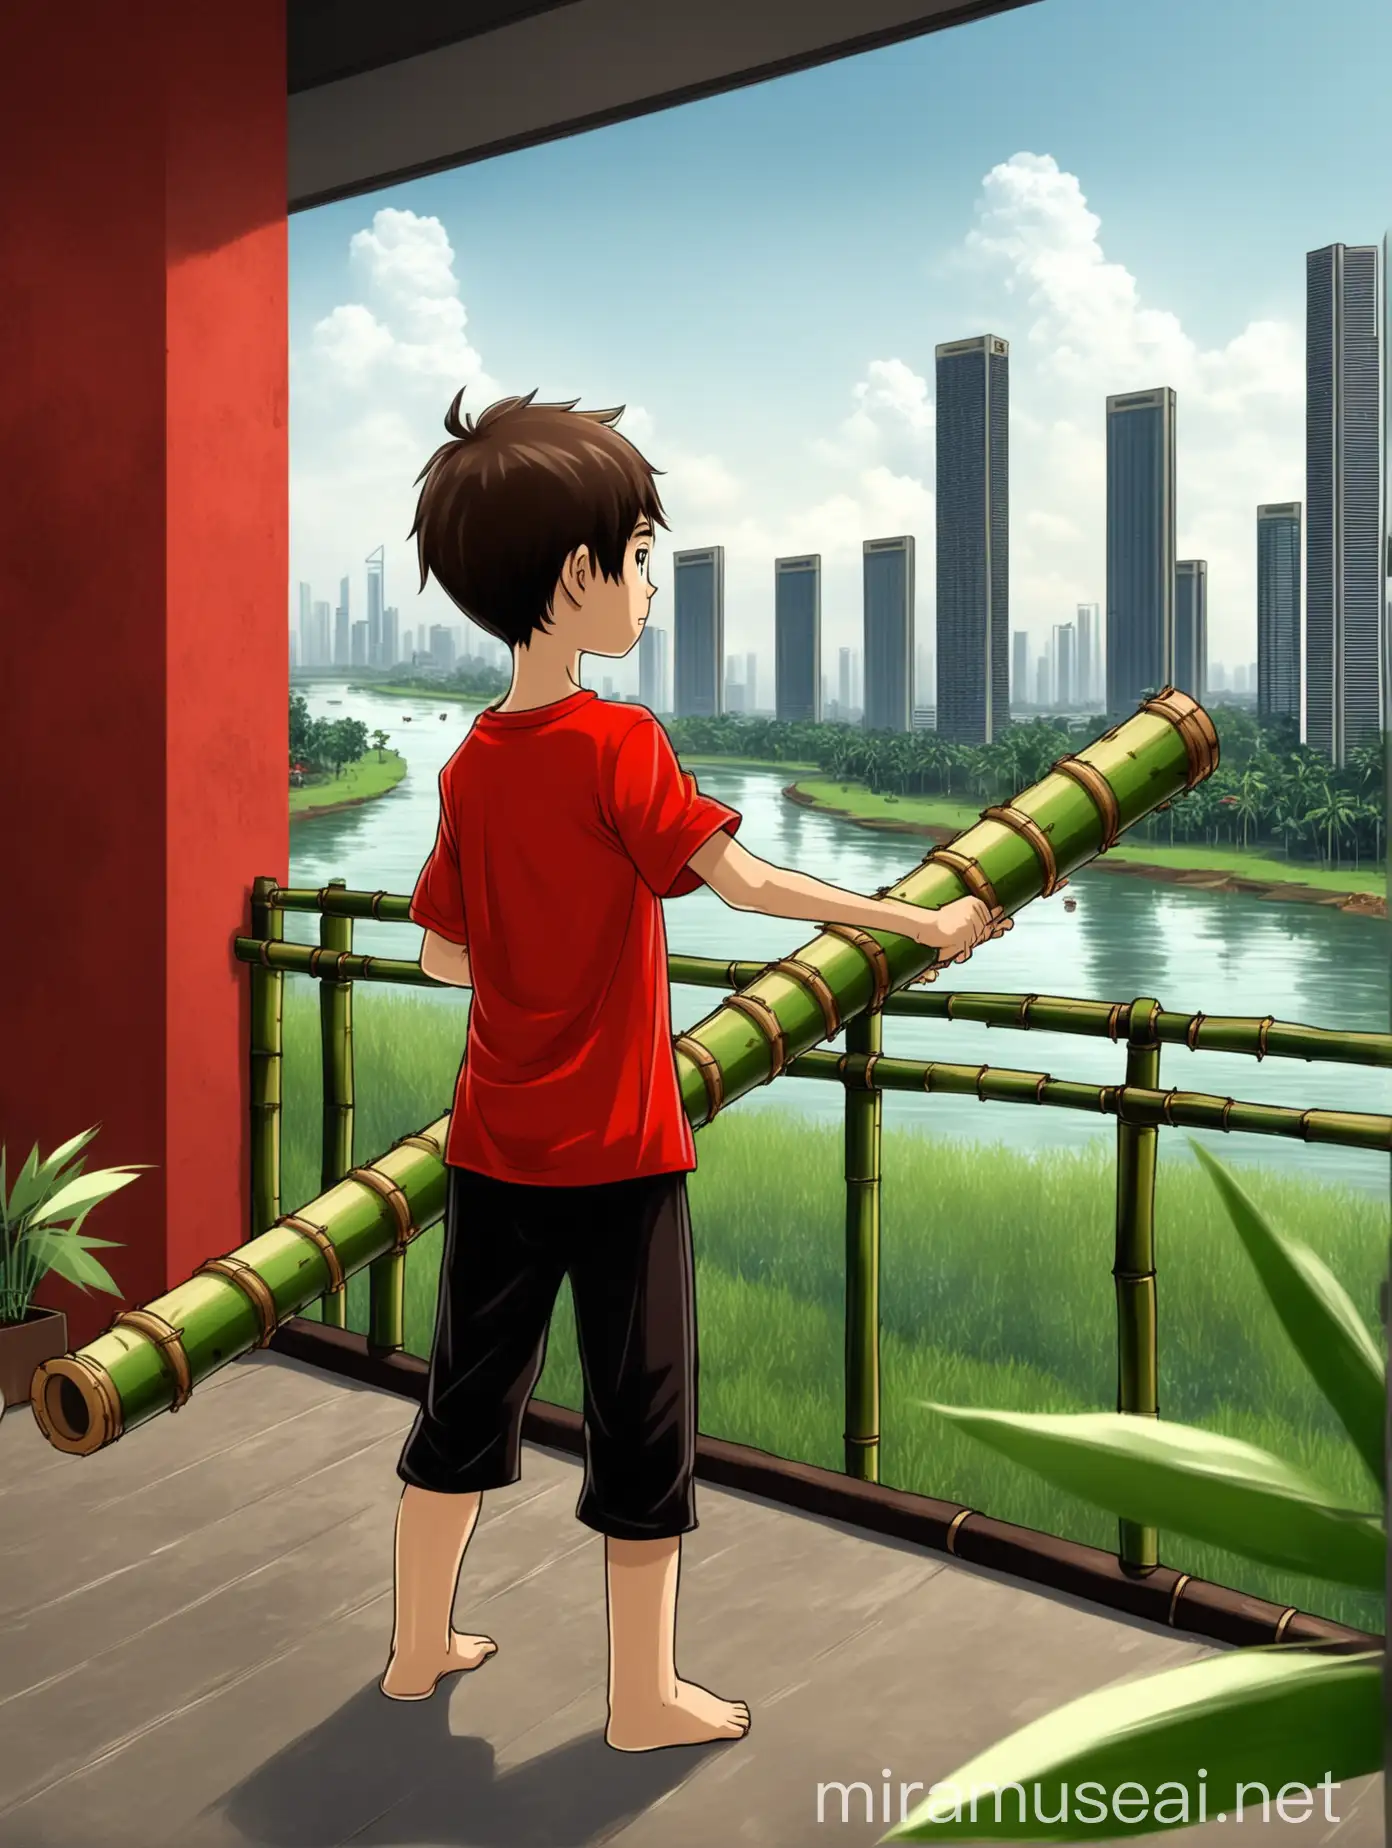 Animated young boy playing bamboo cannon outside a beutifull home with a view of the luxury skyscrapers and river in Jakarta Indonesia while wearing a red t-shirt and black pants.